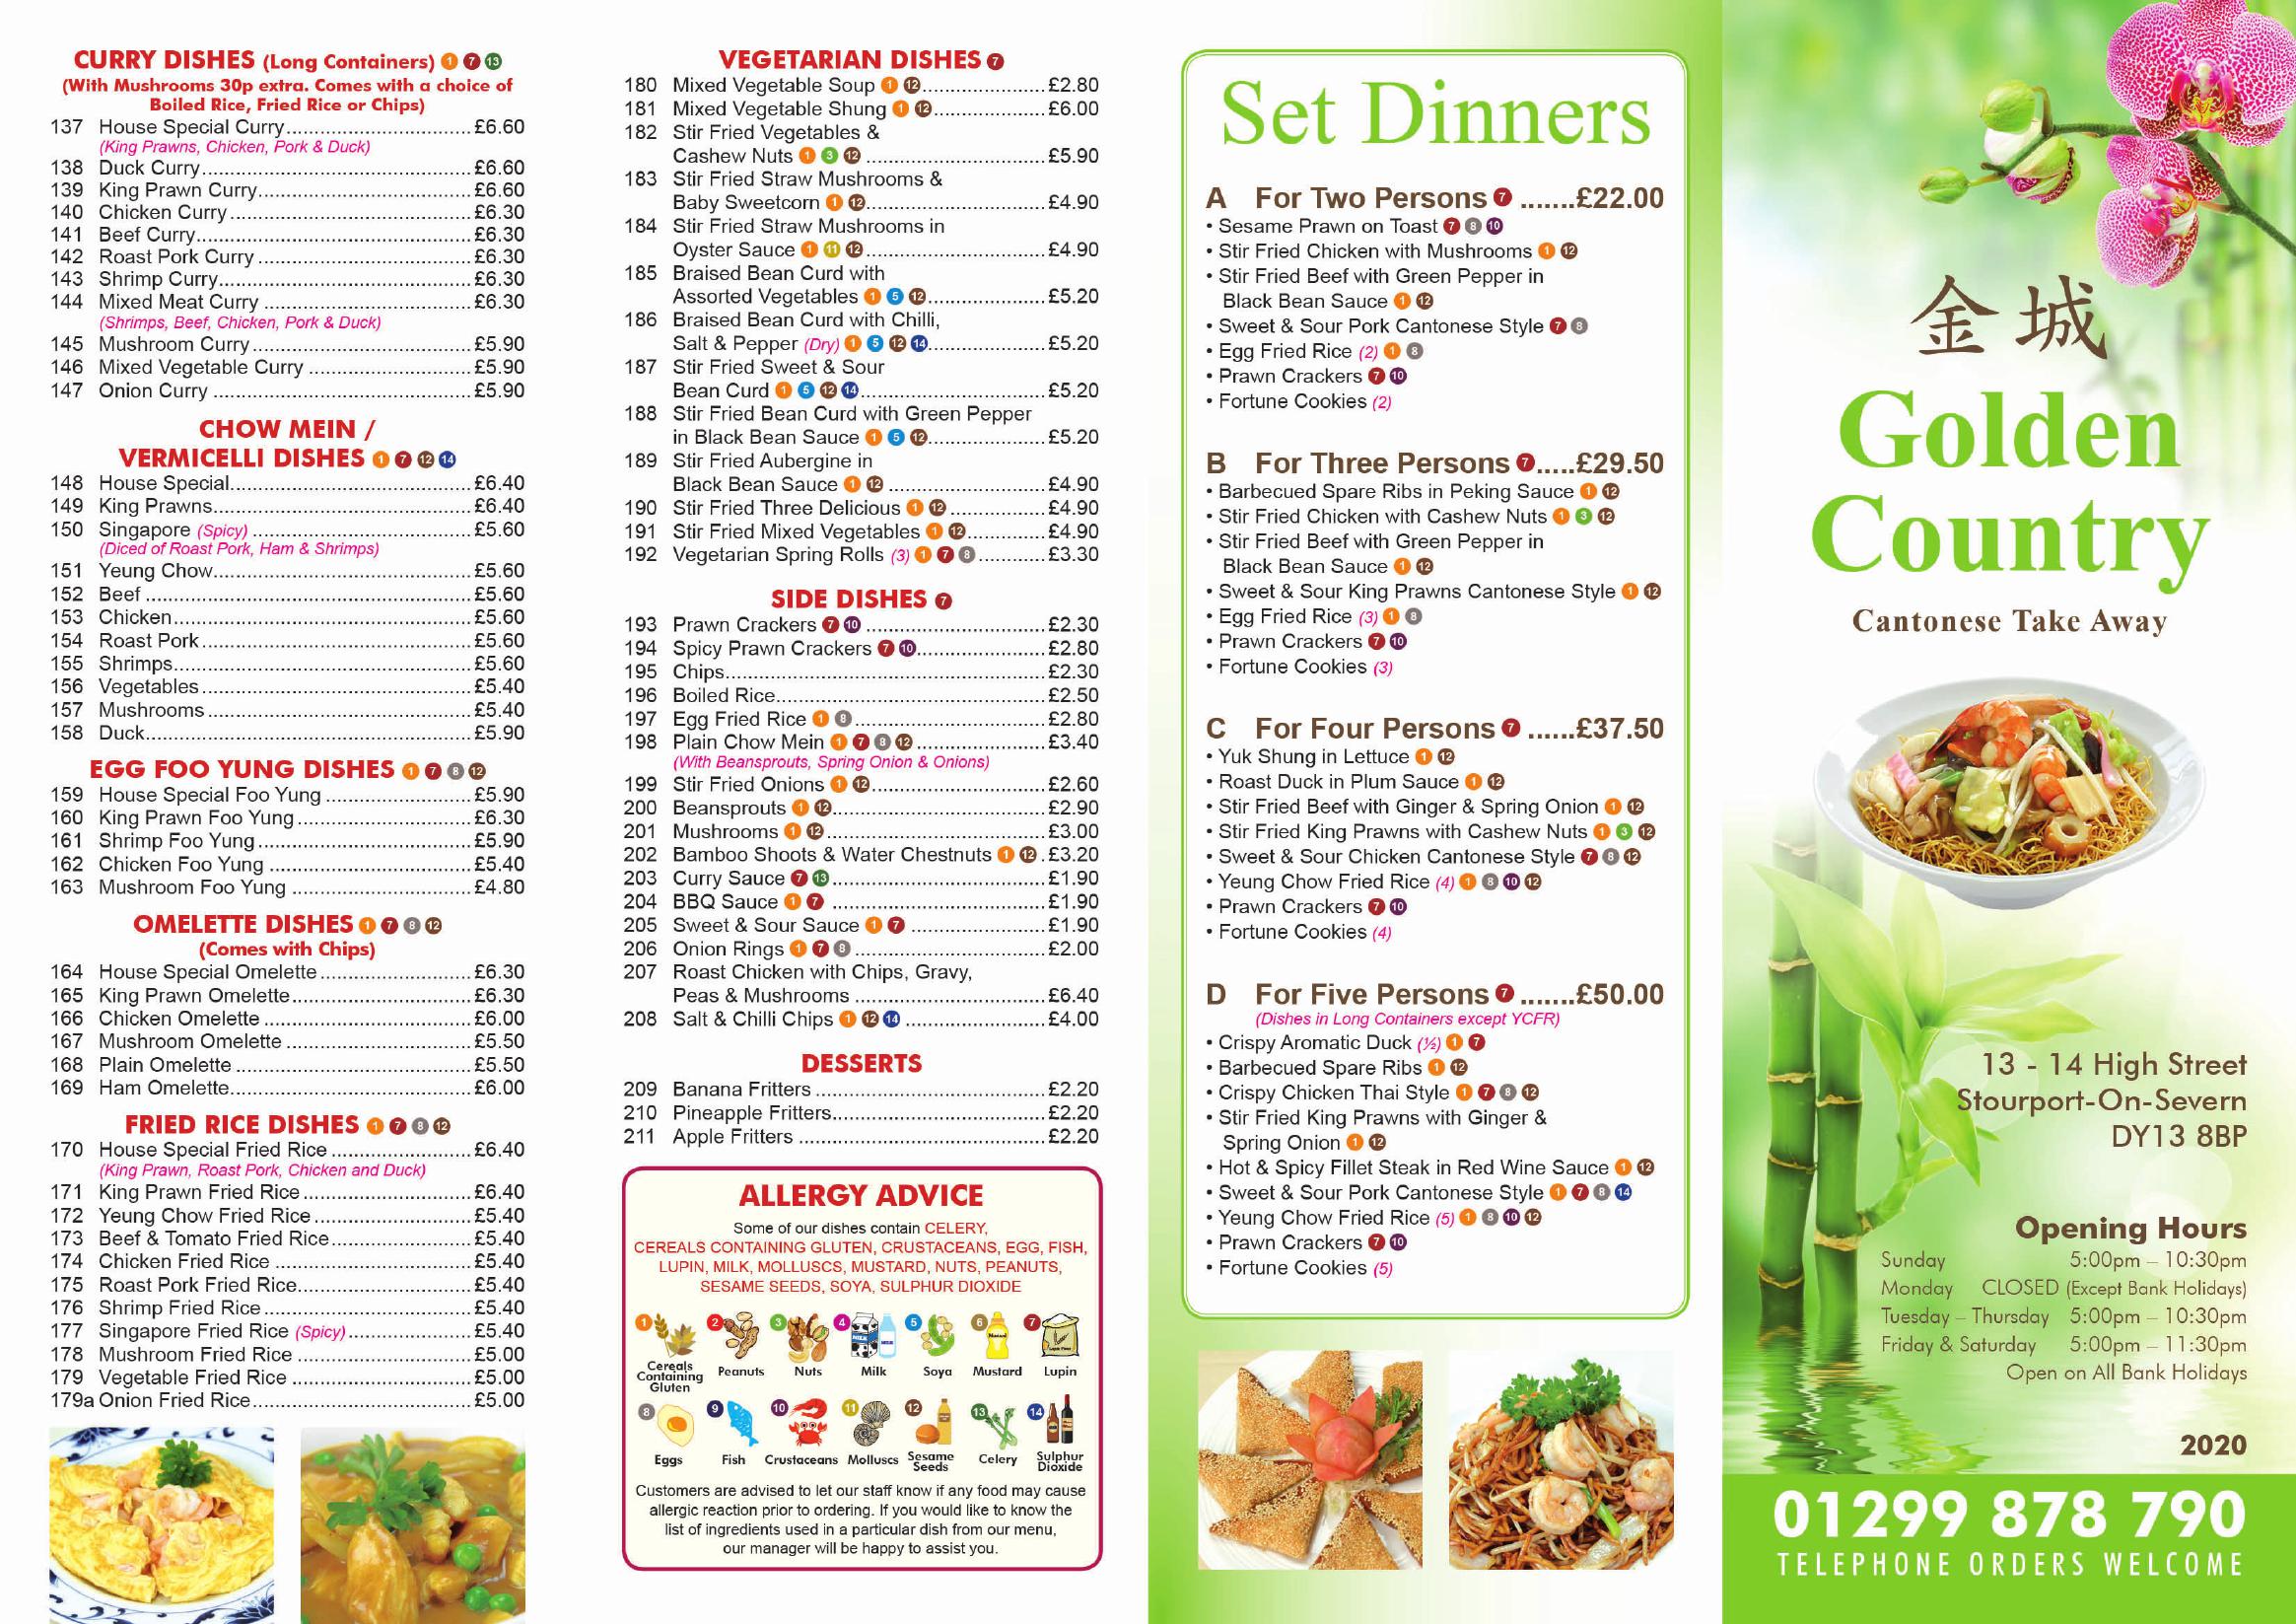 Golden Country Restaurant and Takeaway - main menu